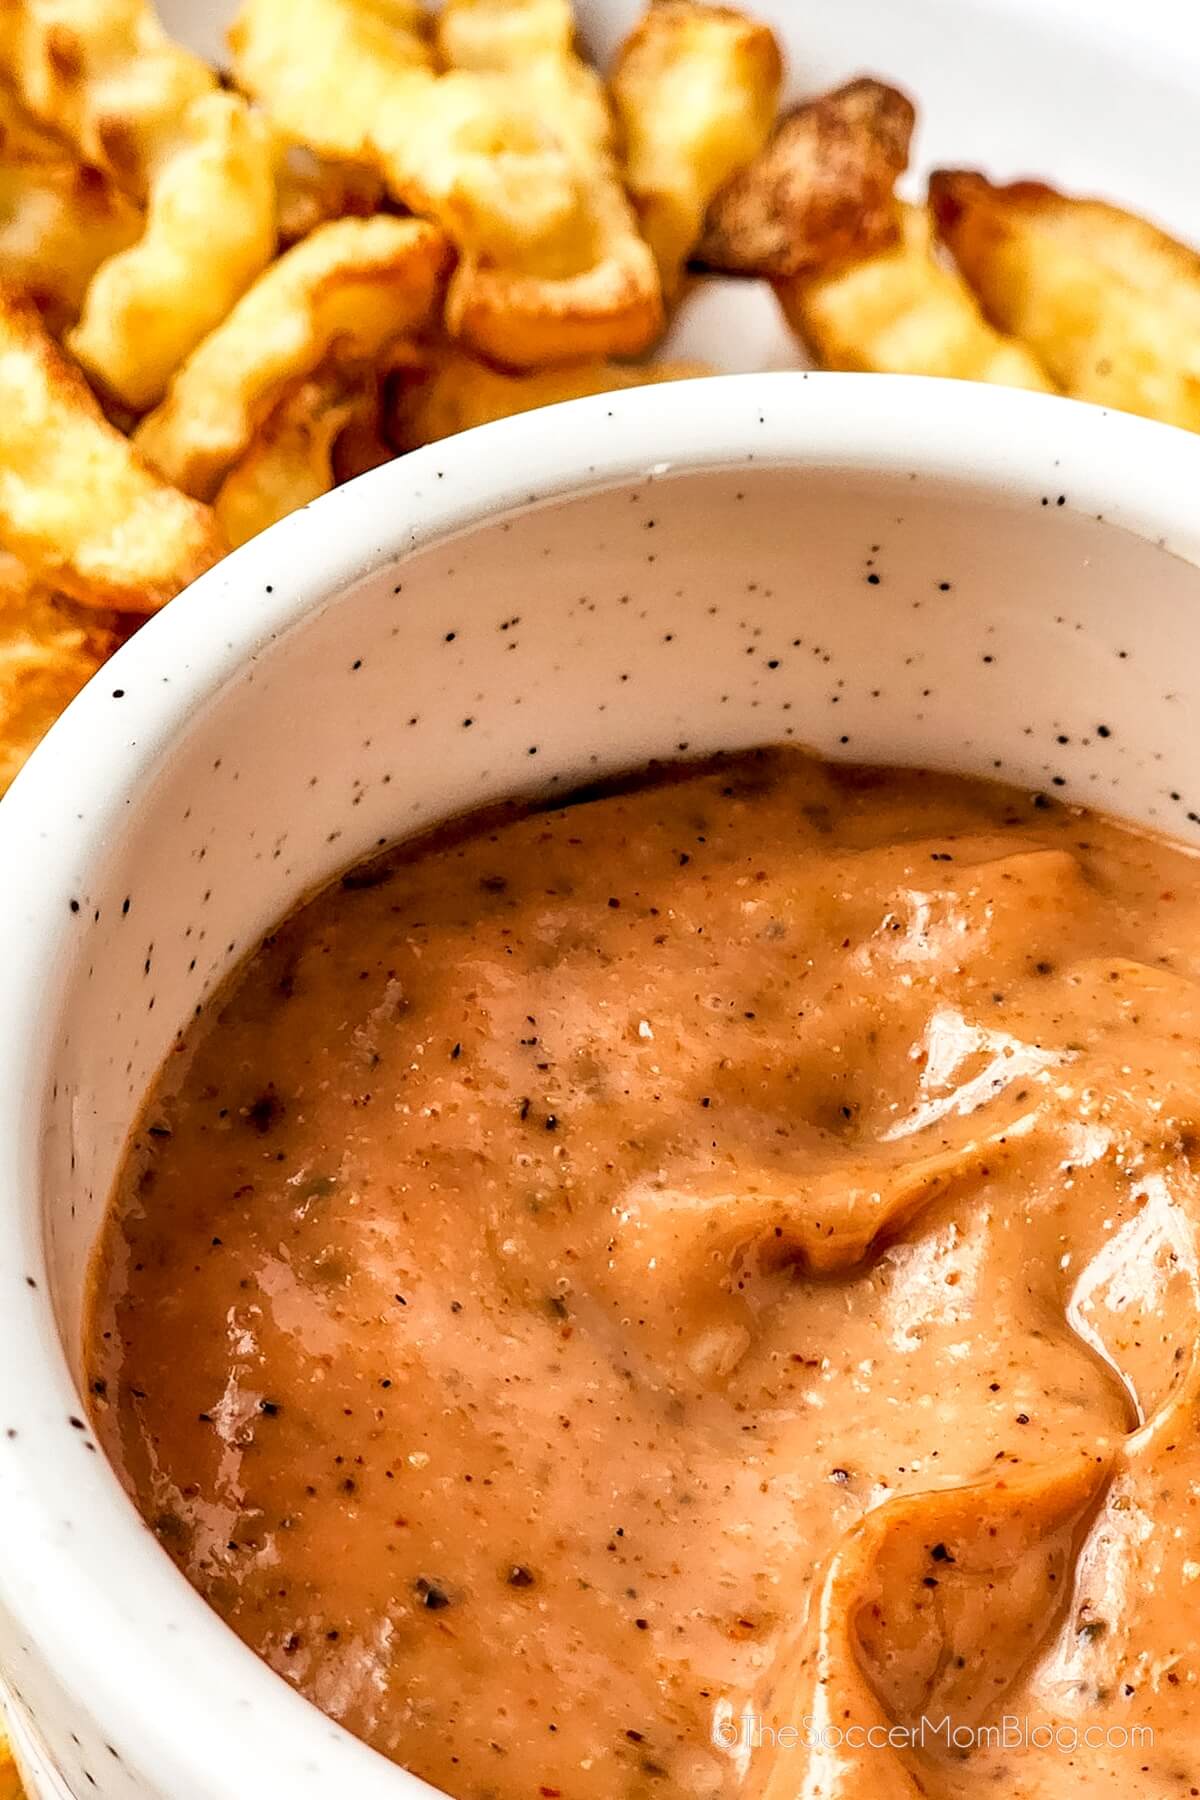 close up of orange dipping sauce on a plate of fries.